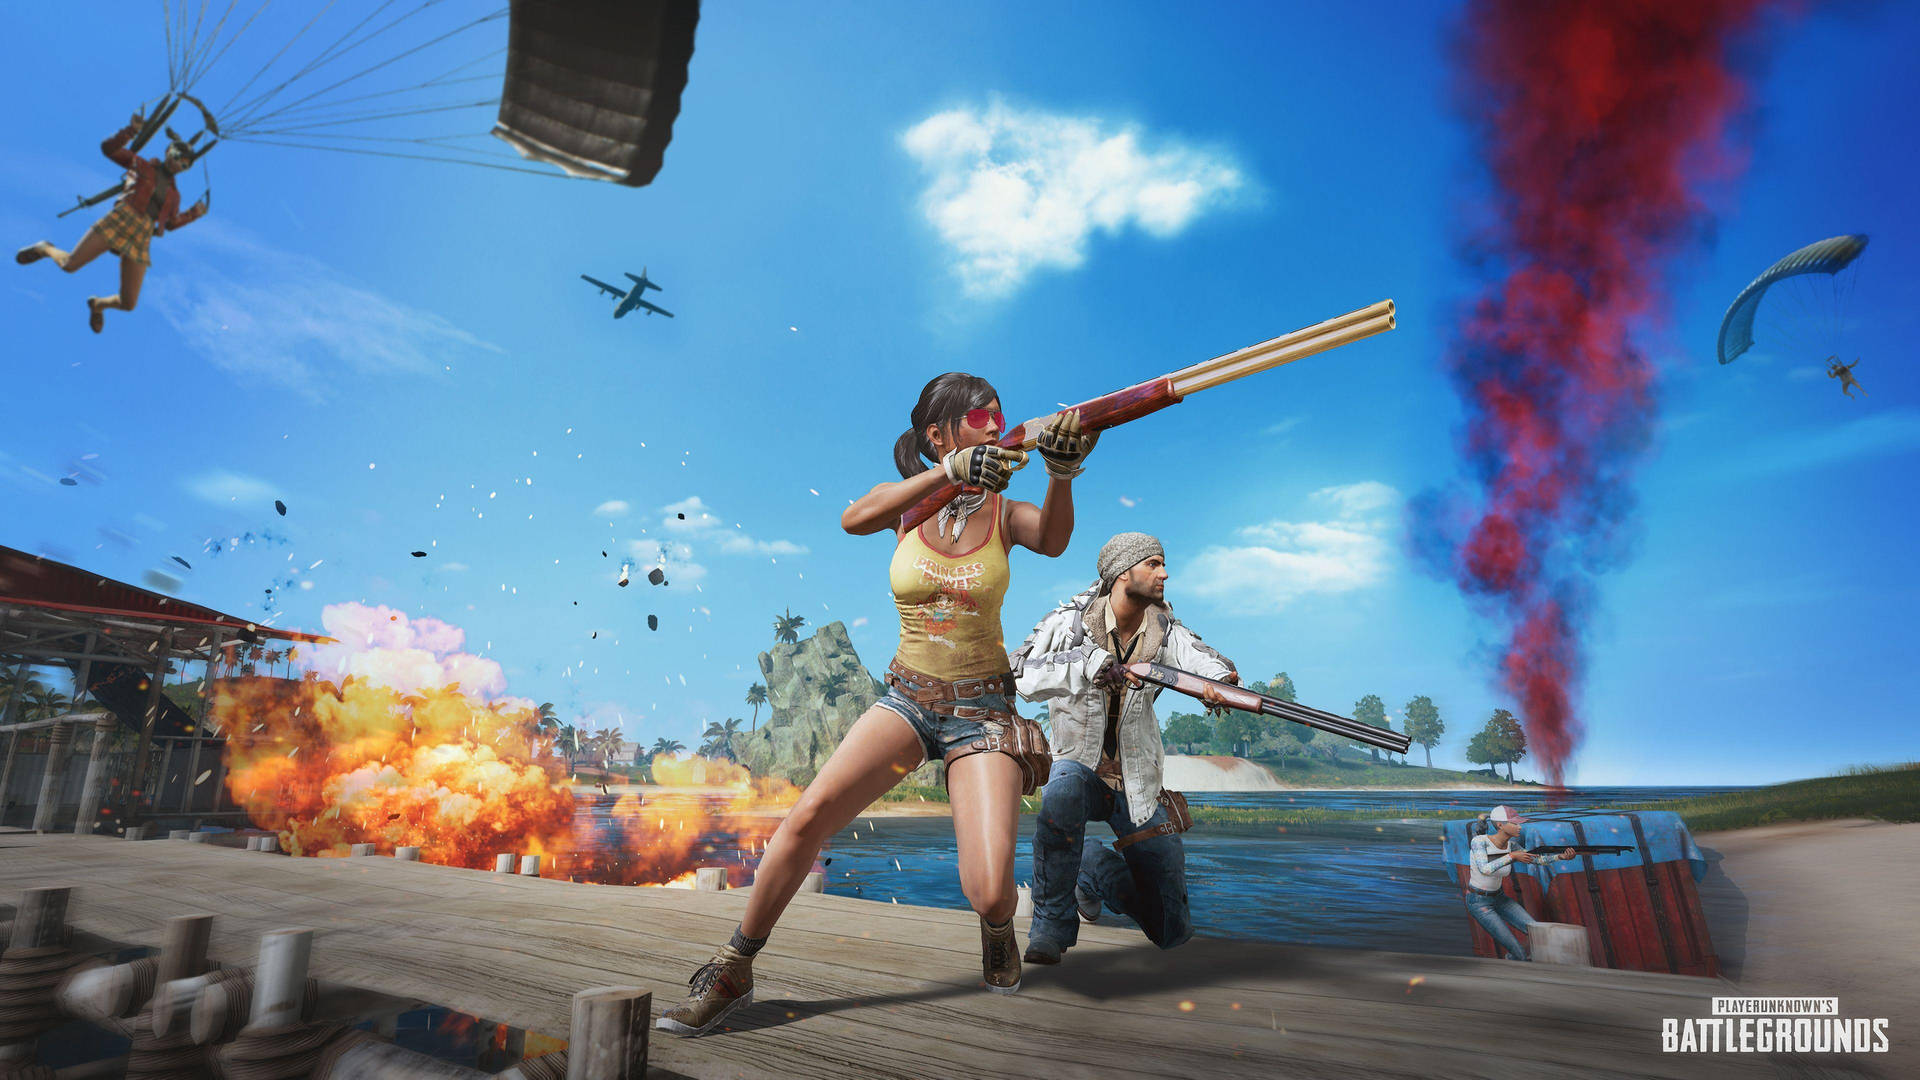 Pubg Hd Players With Guns At Pier Background